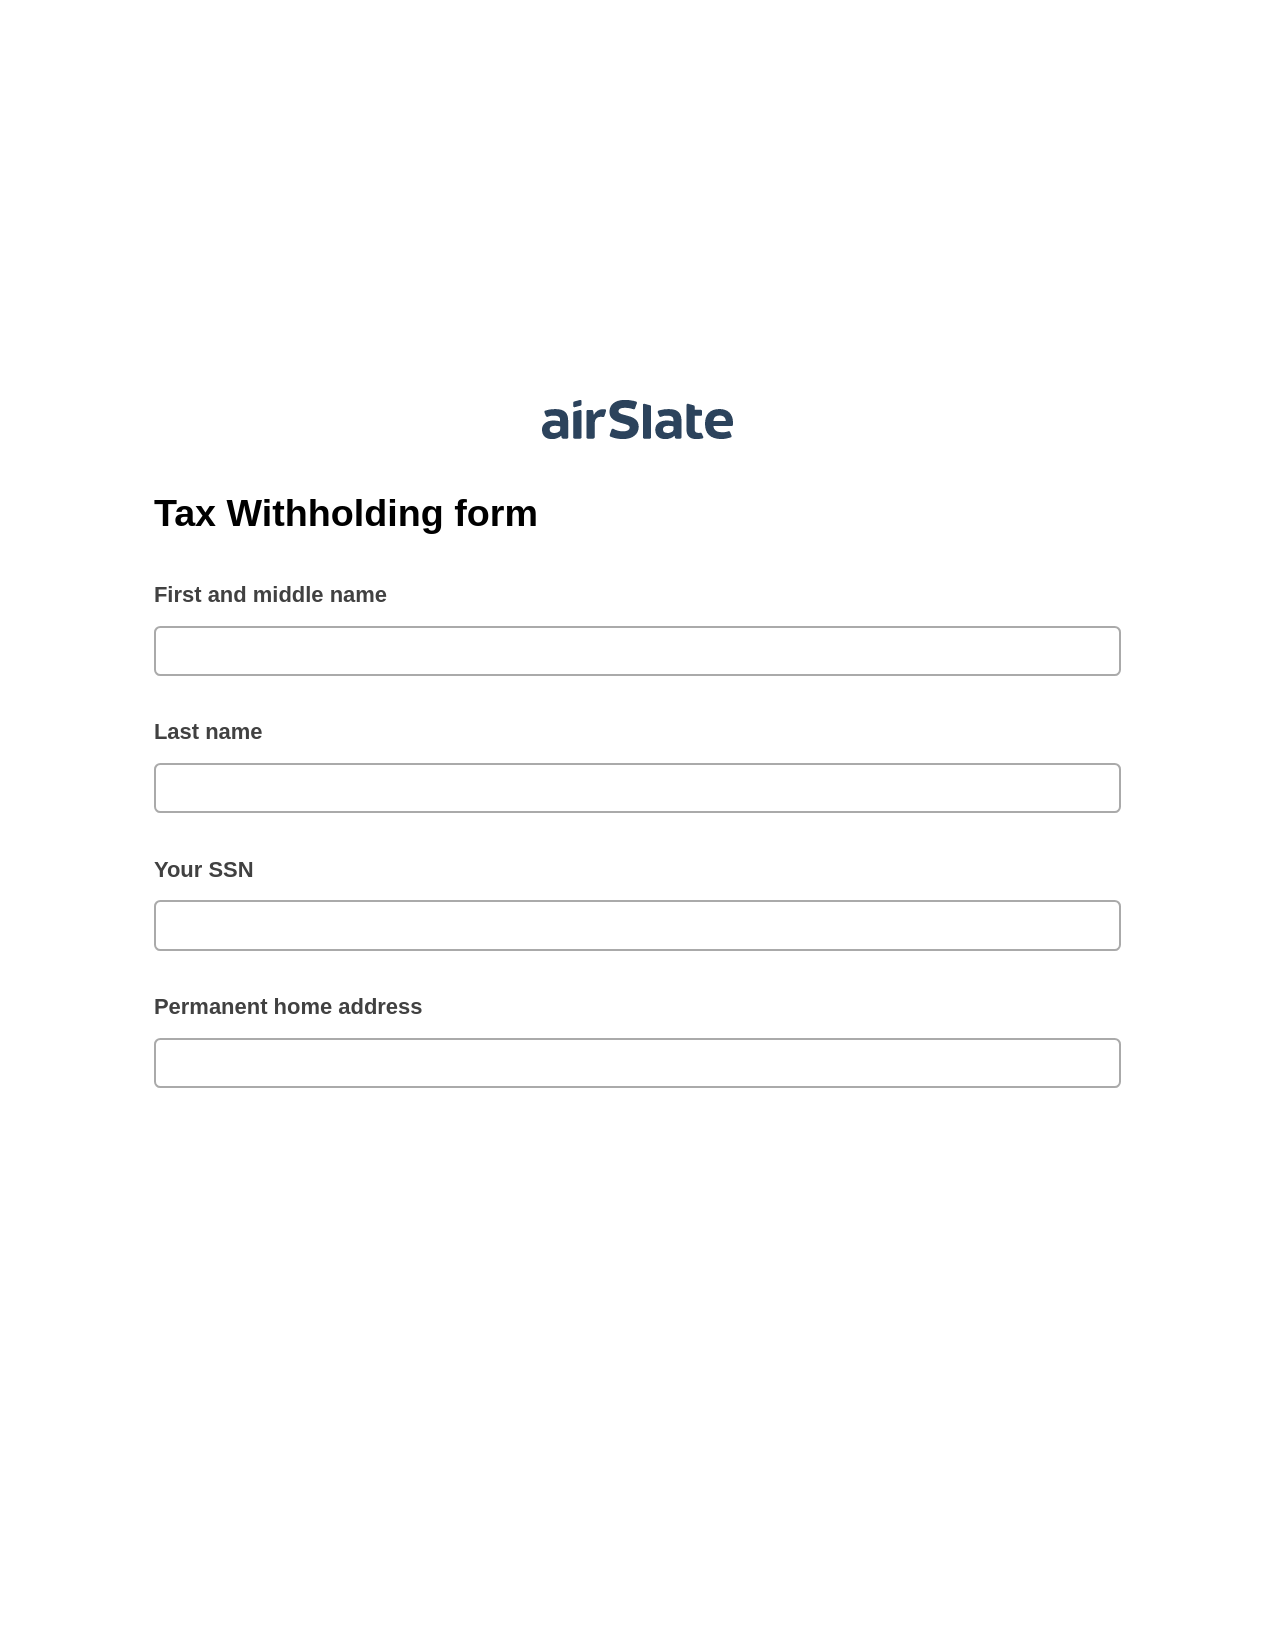 Multirole Tax Withholding form Pre-fill Dropdowns from MySQL Bot, Audit Trail Bot, Post-finish Document Bot